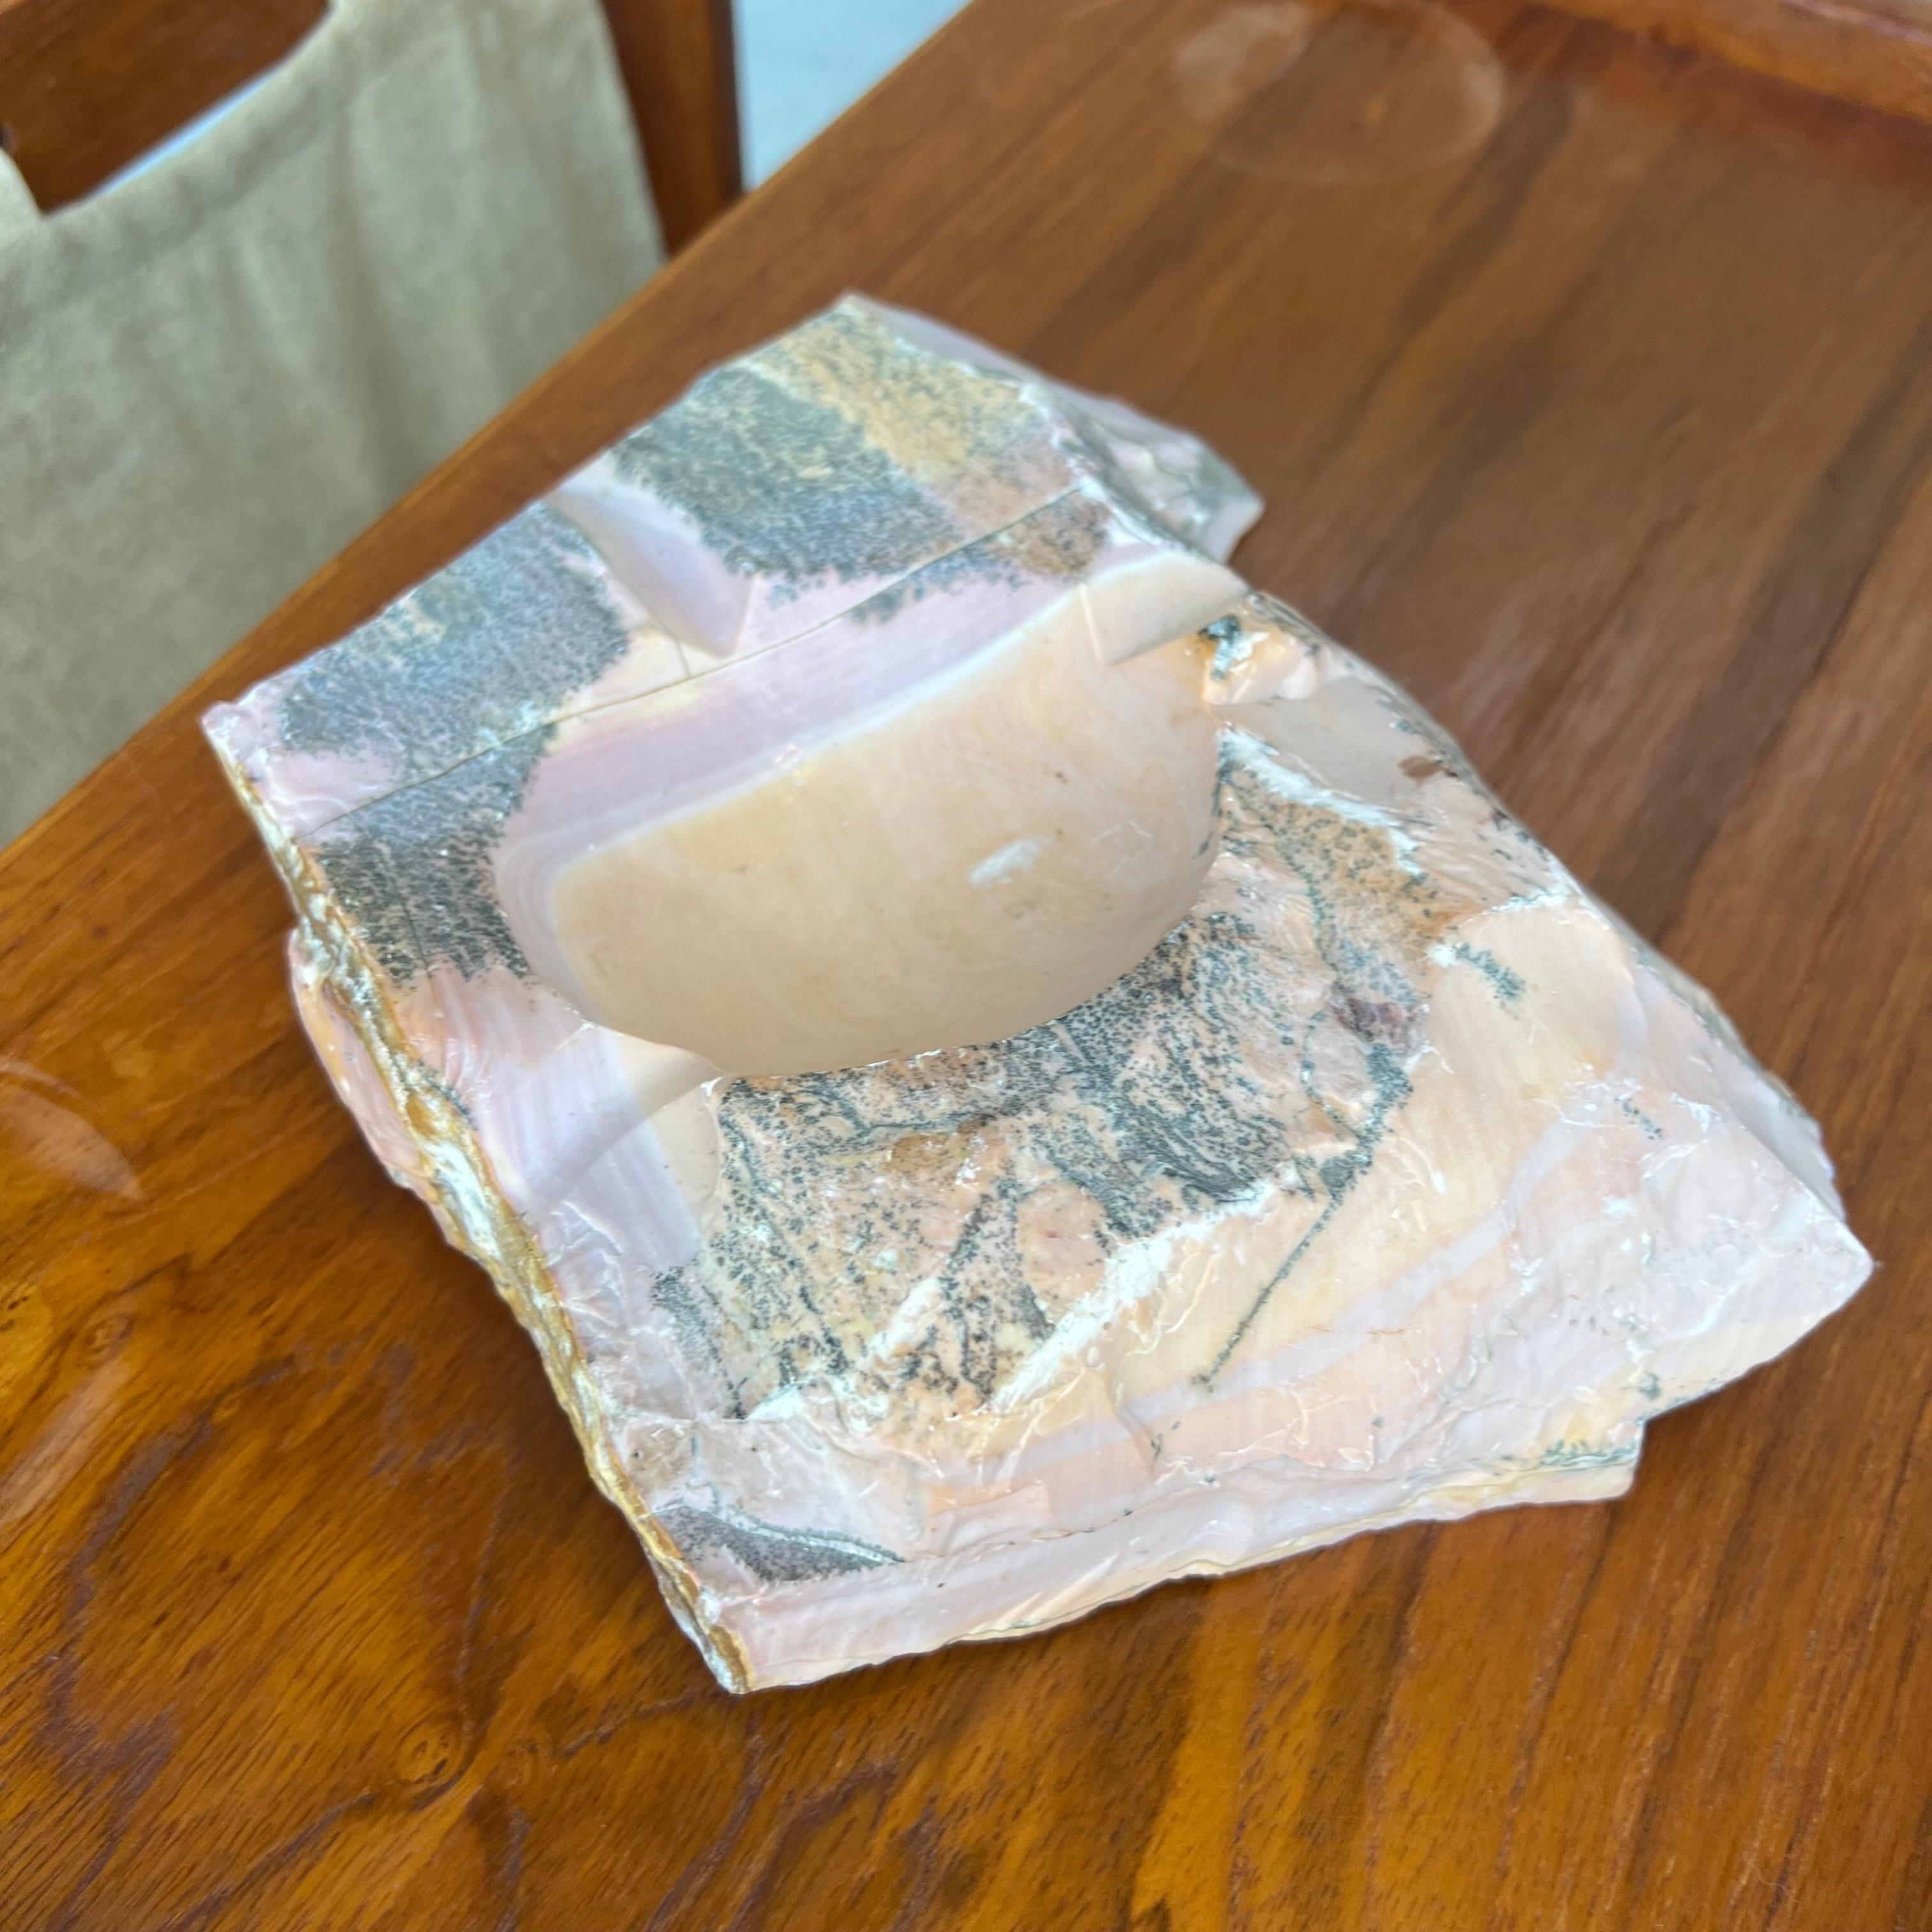 An absolutely stunning pink and gray marble/ alabaster slab catchall. Mostly rough unpolished, the veining is so pretty.